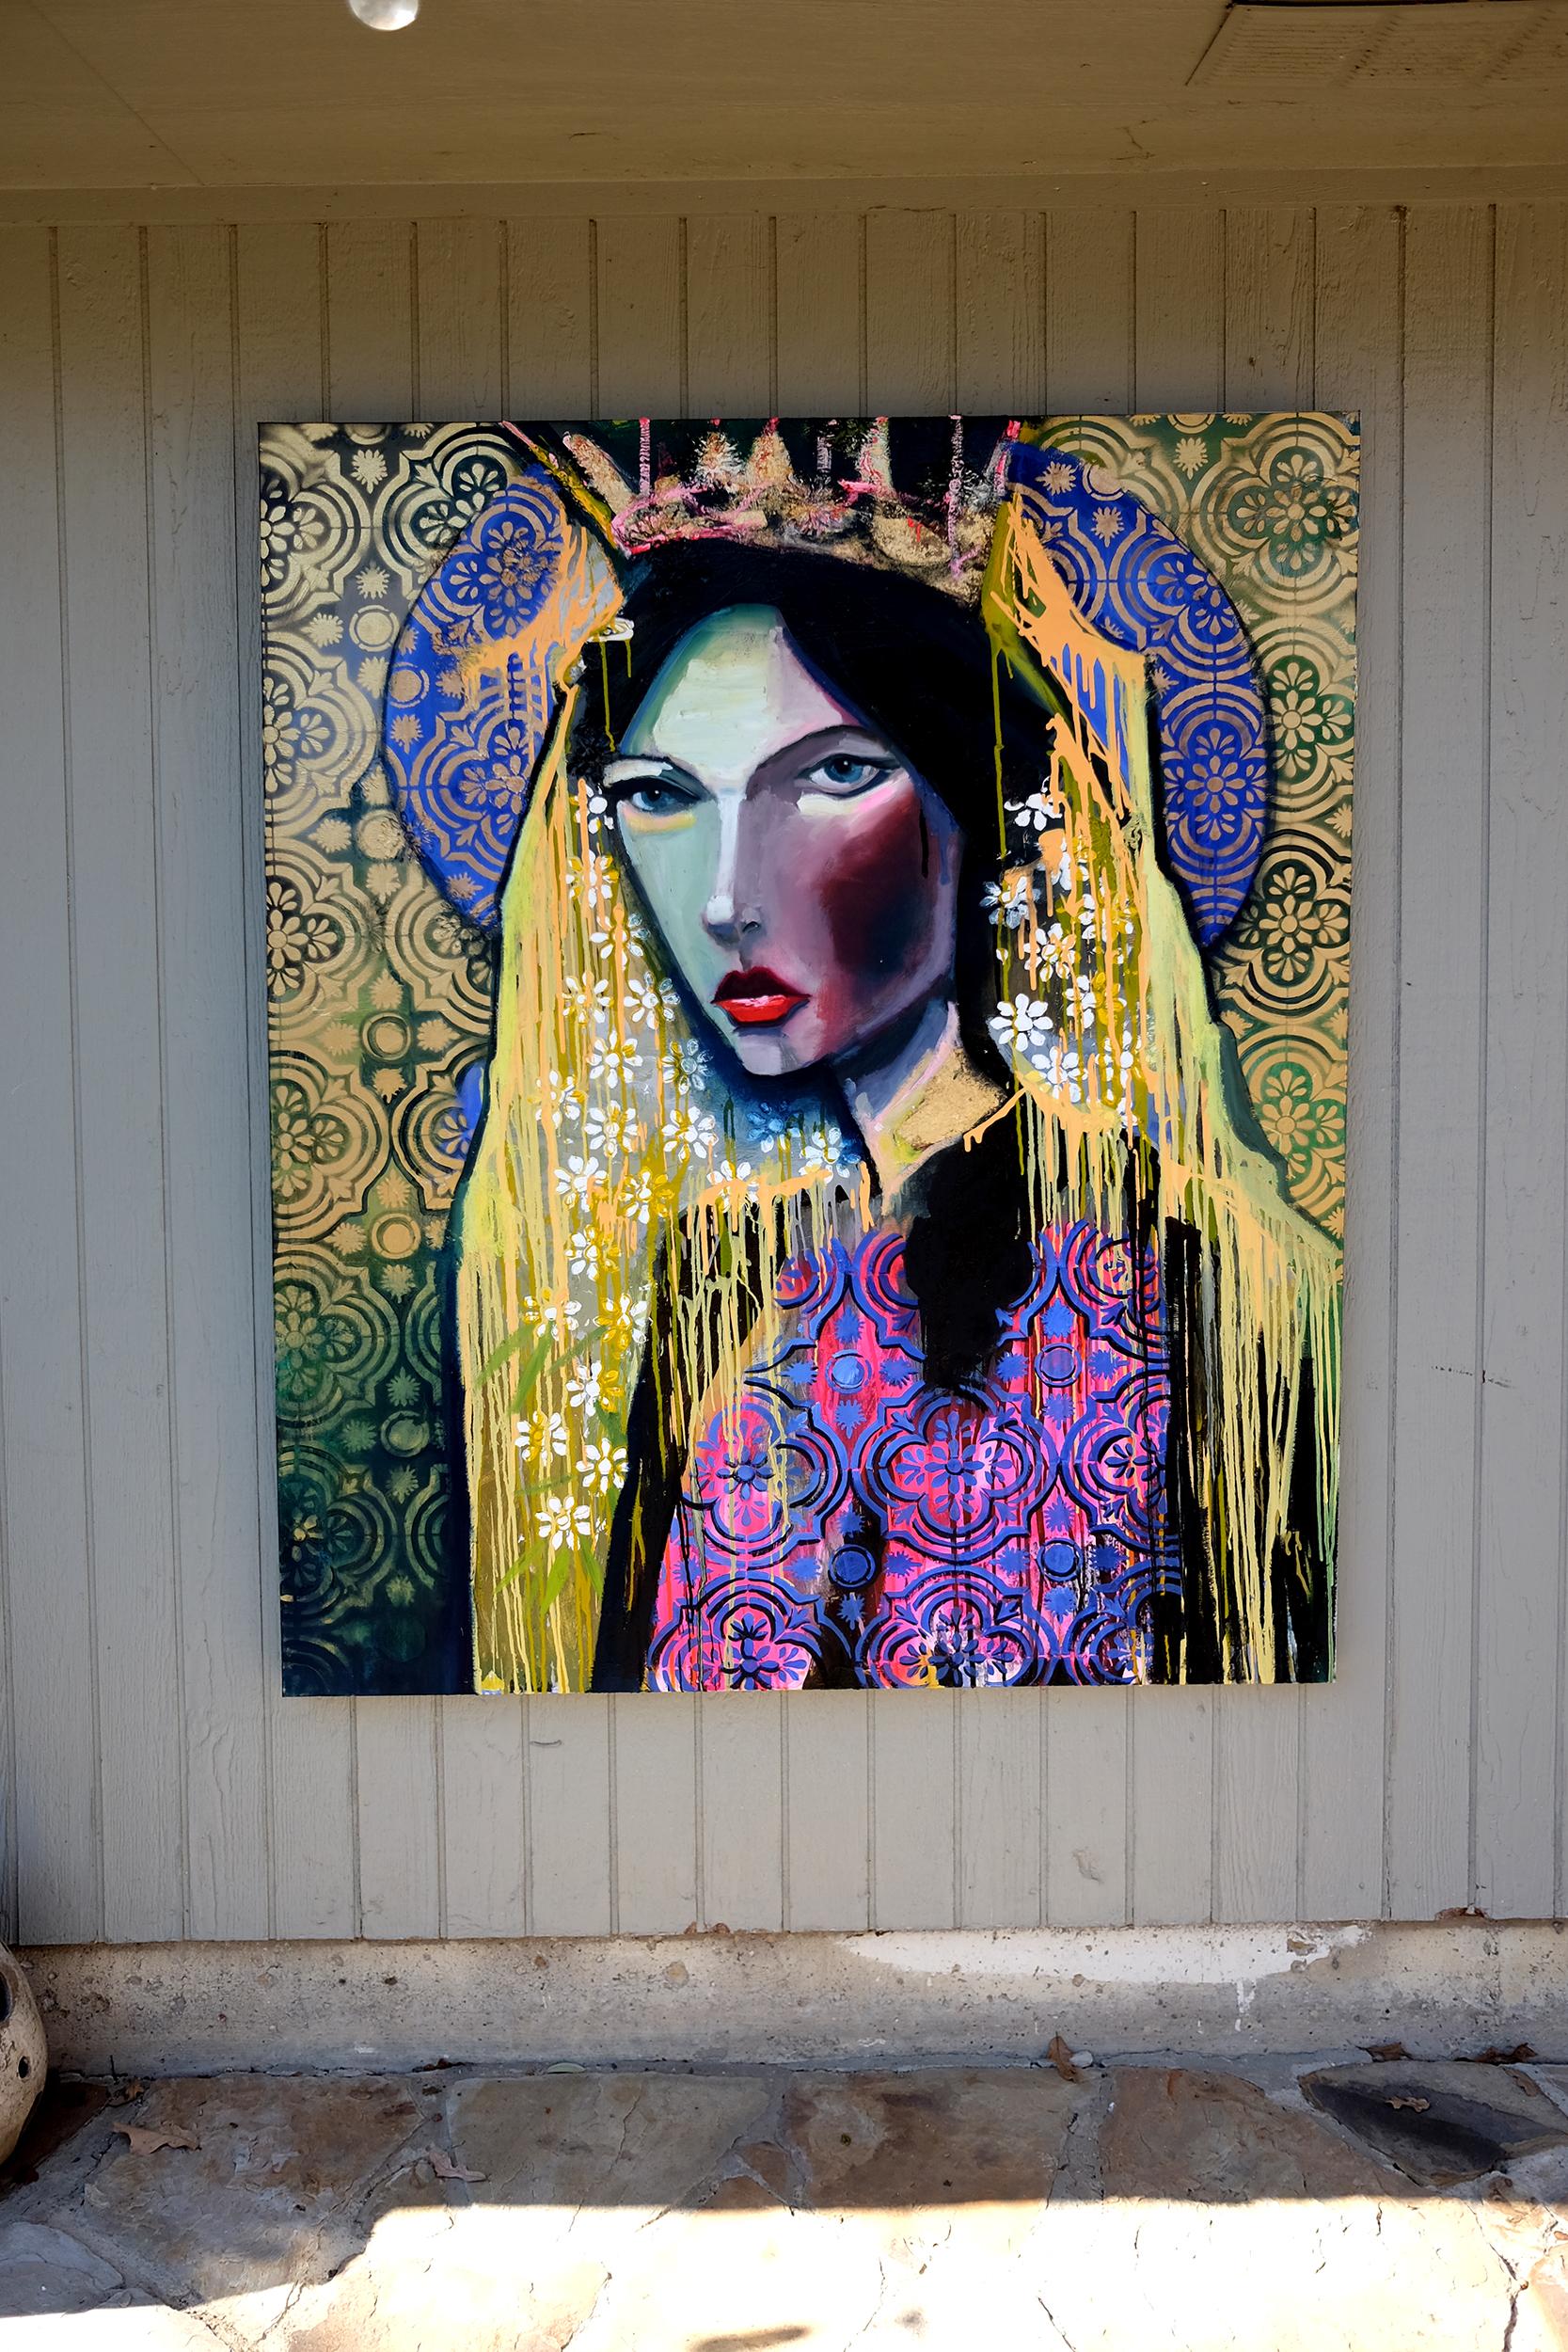 Decorated Queen, Original Painting - Contemporary Mixed Media Art by Scott Dykema